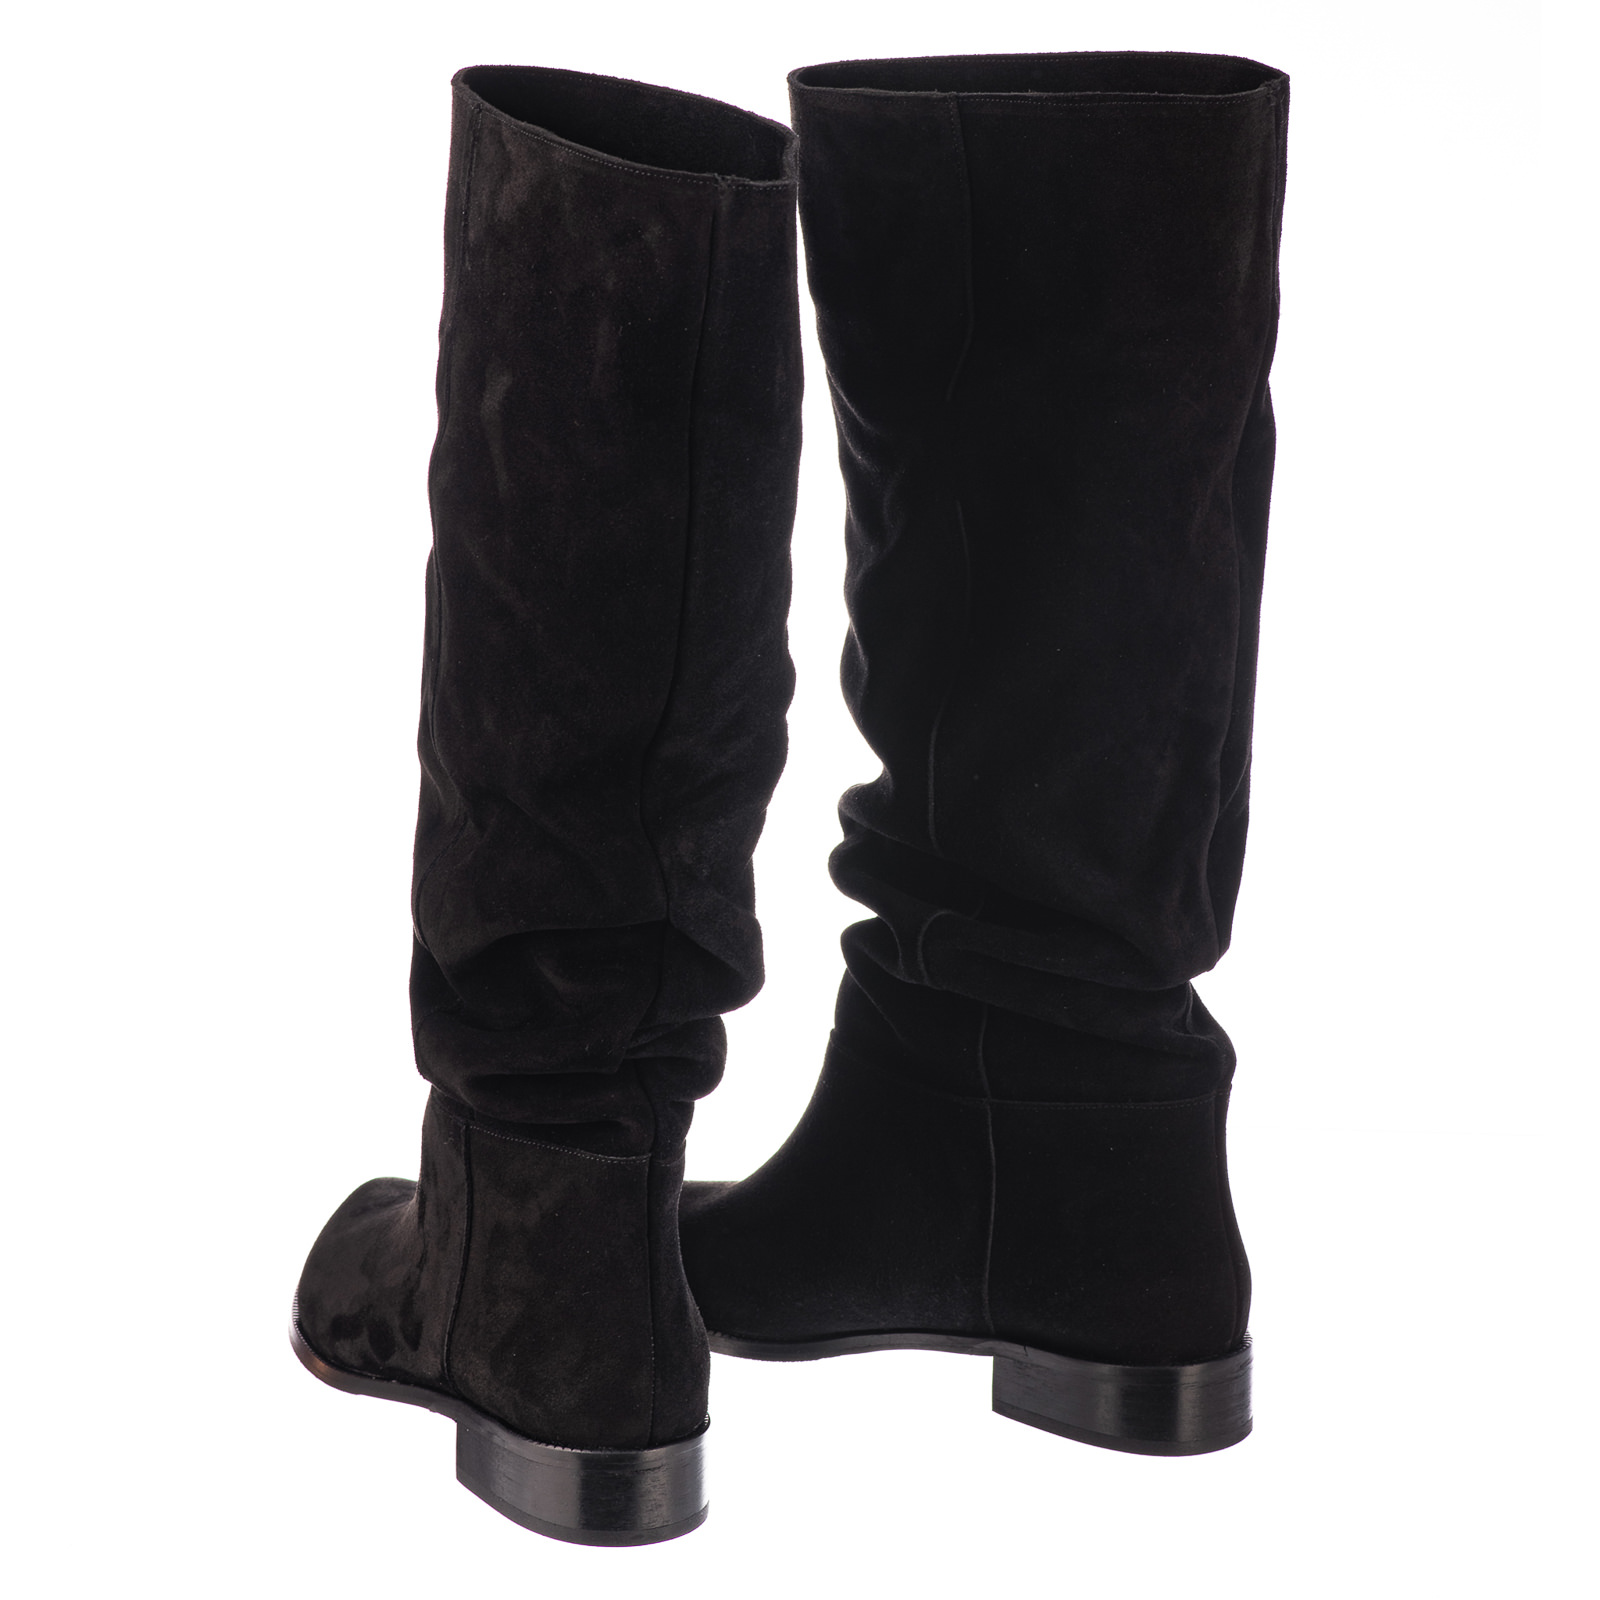 Leather boots B736 - BLACK